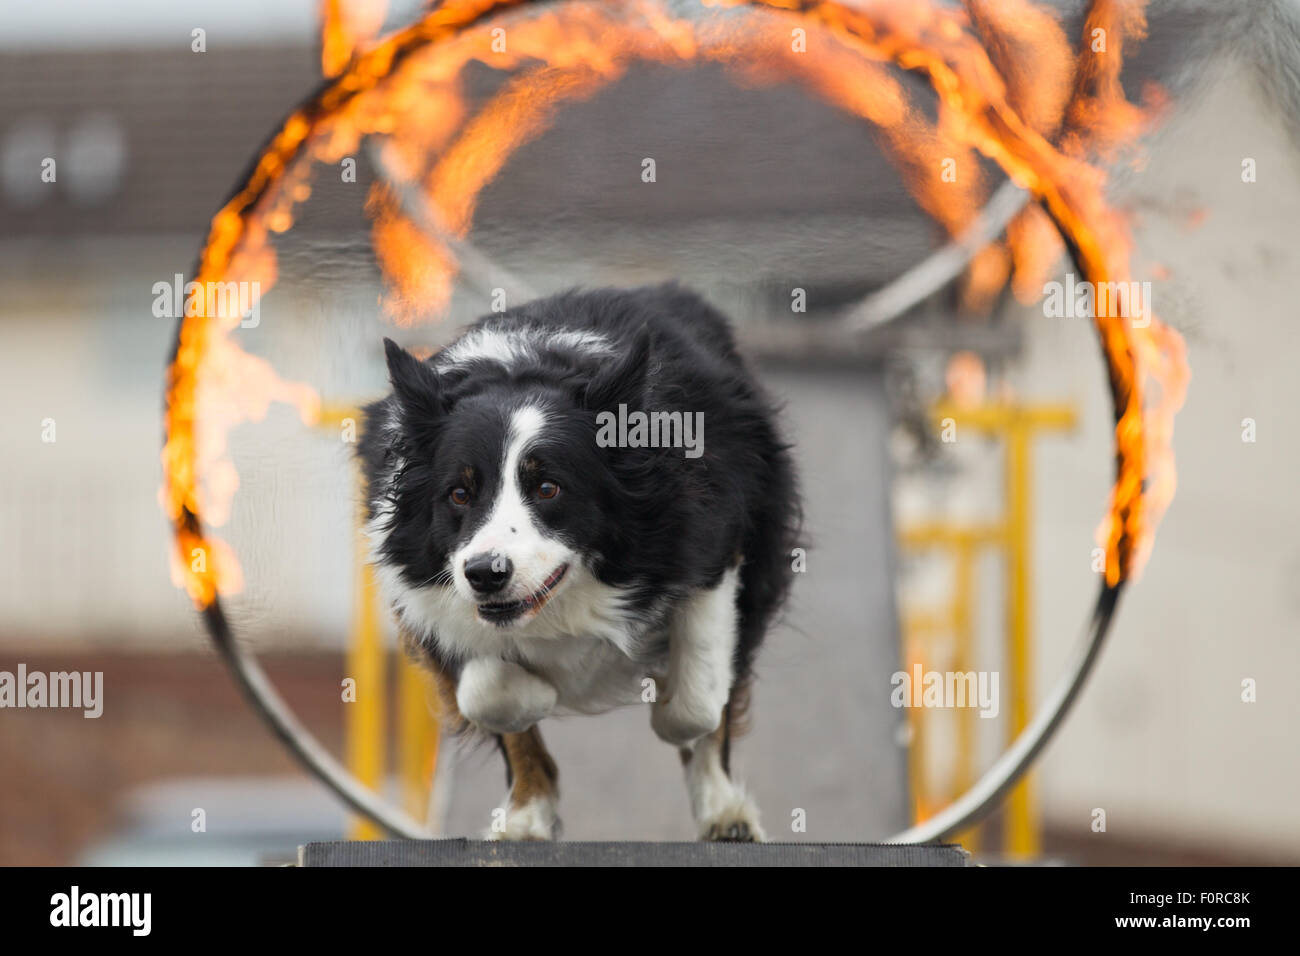 A dog jumps through a flaming hoop during an agility display Stock Photo